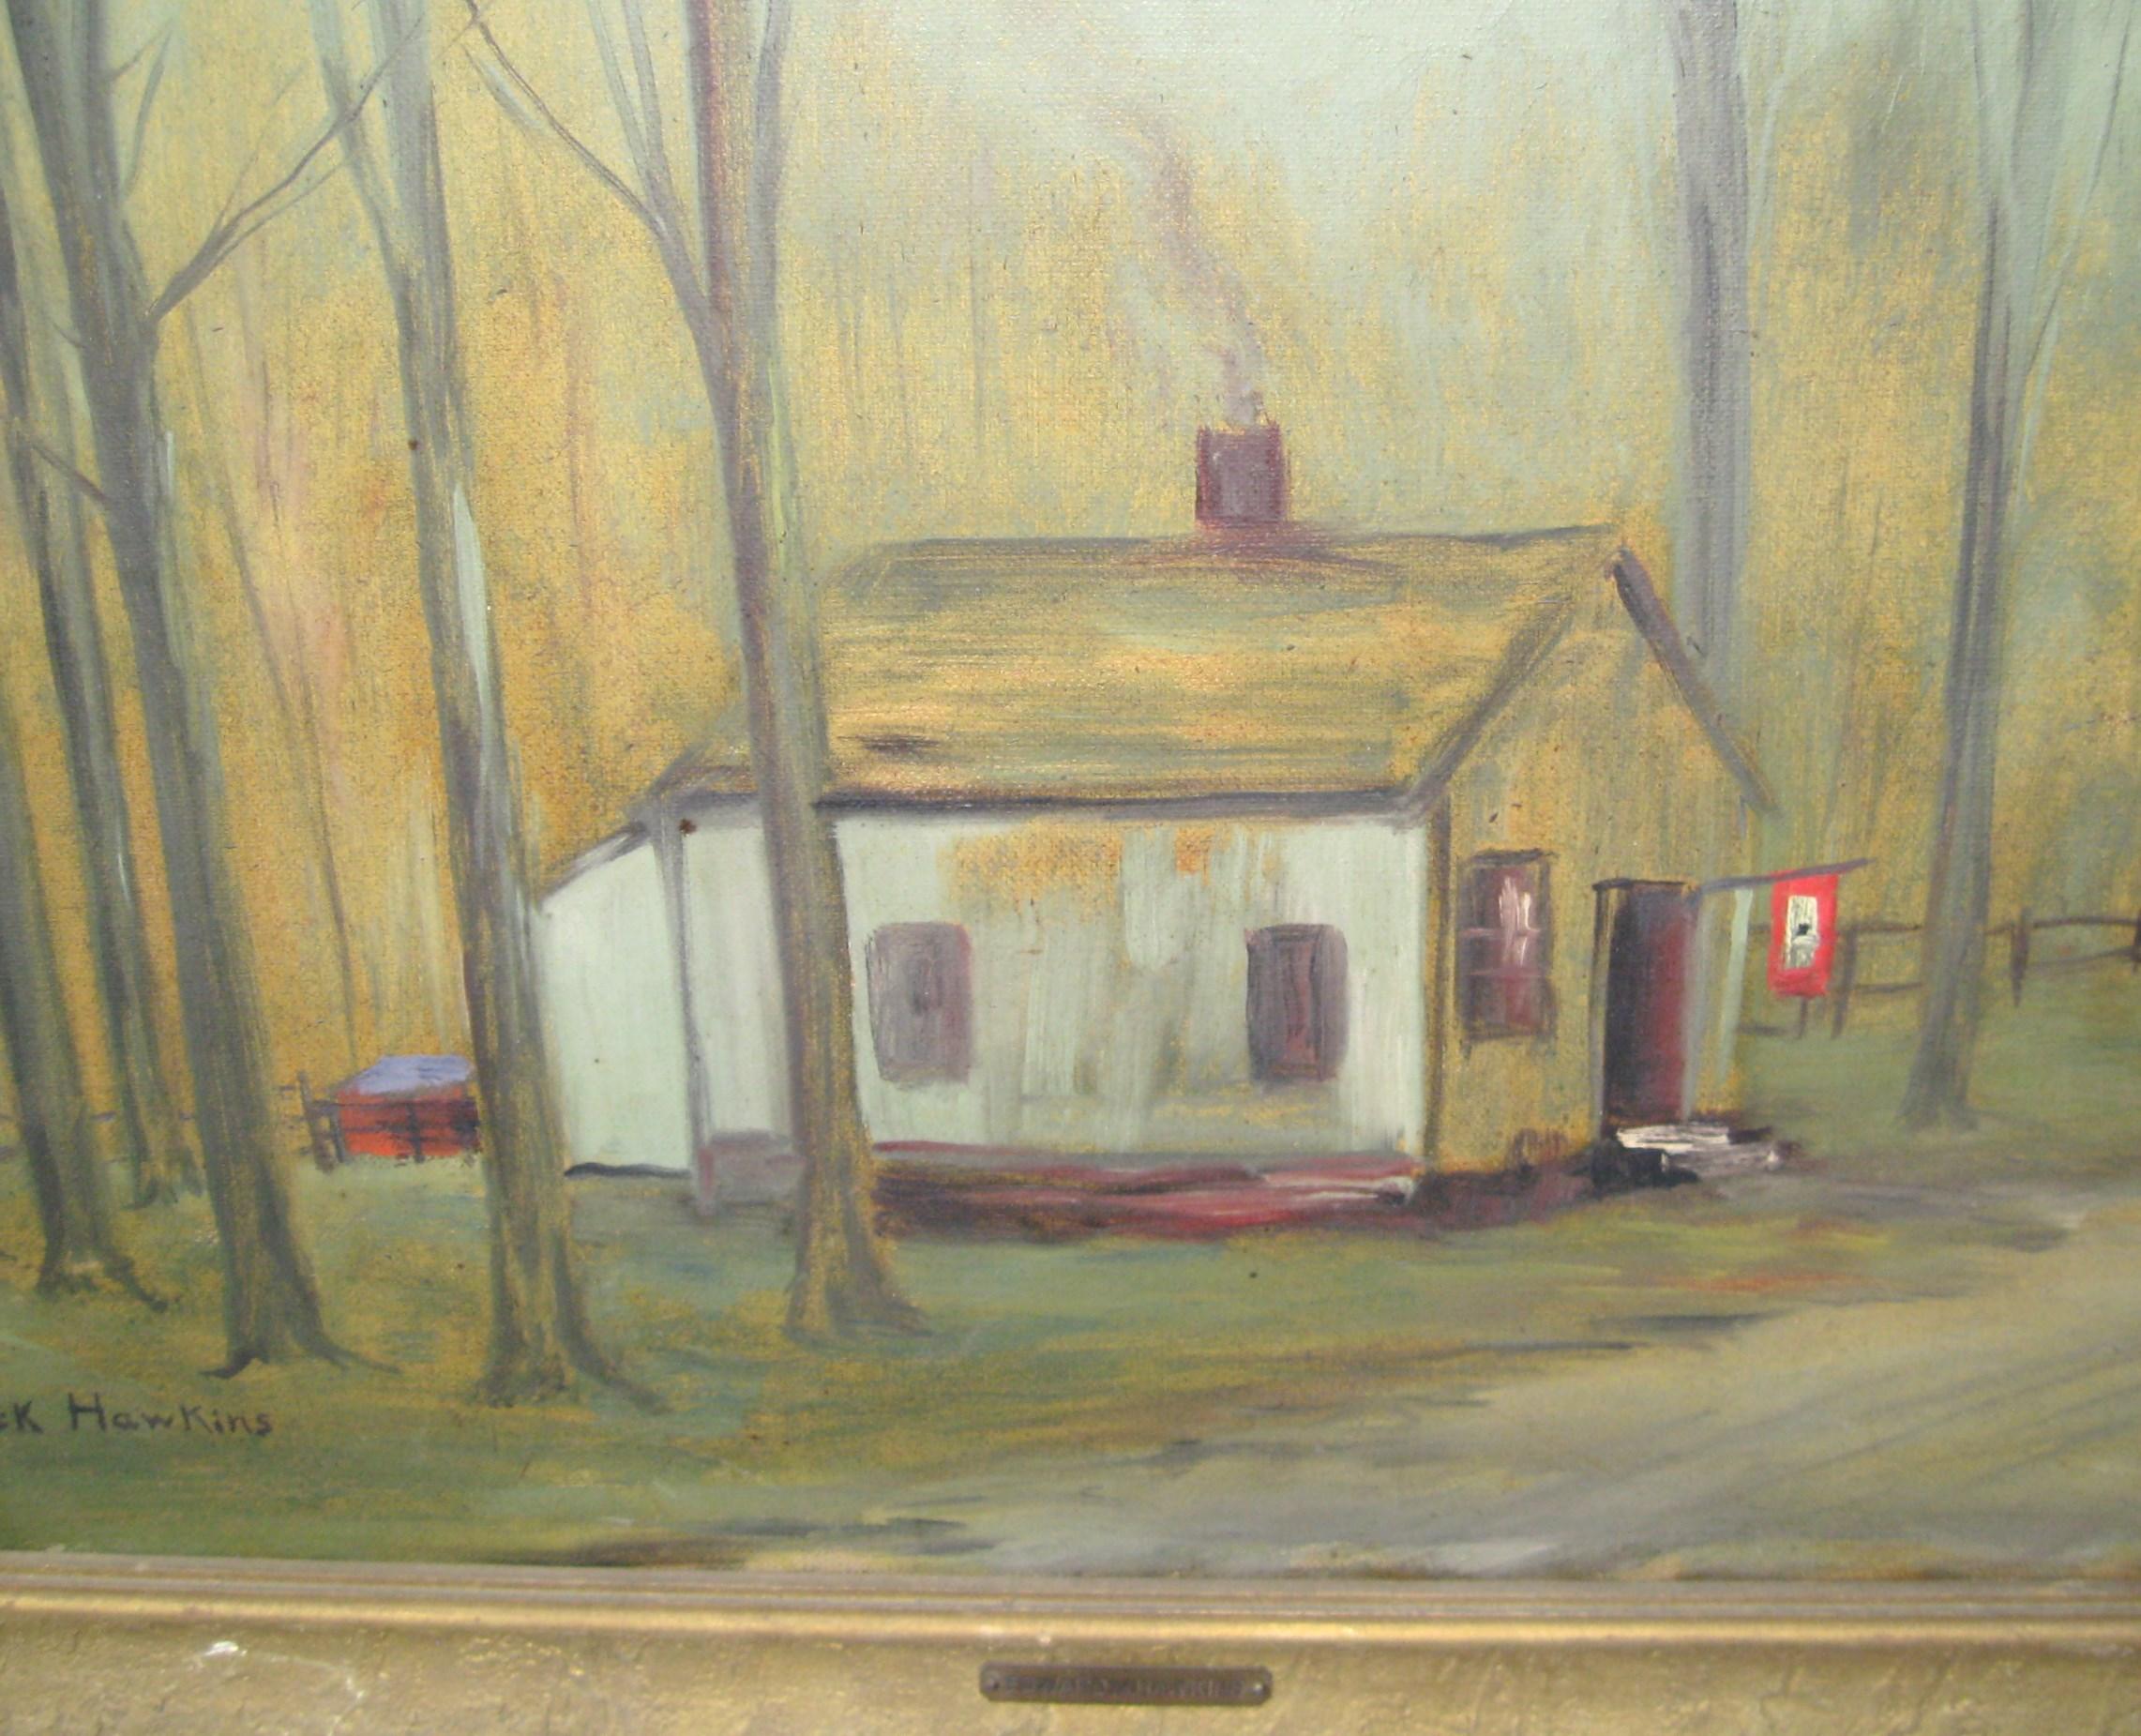 The painting is quaint, as written on the back Edward Mack Hawkins the artist was motoring from NYC to Upstate during the World War, Near Windset on a country road he saw this meager little home bravely flaunting our flag with a single service star.